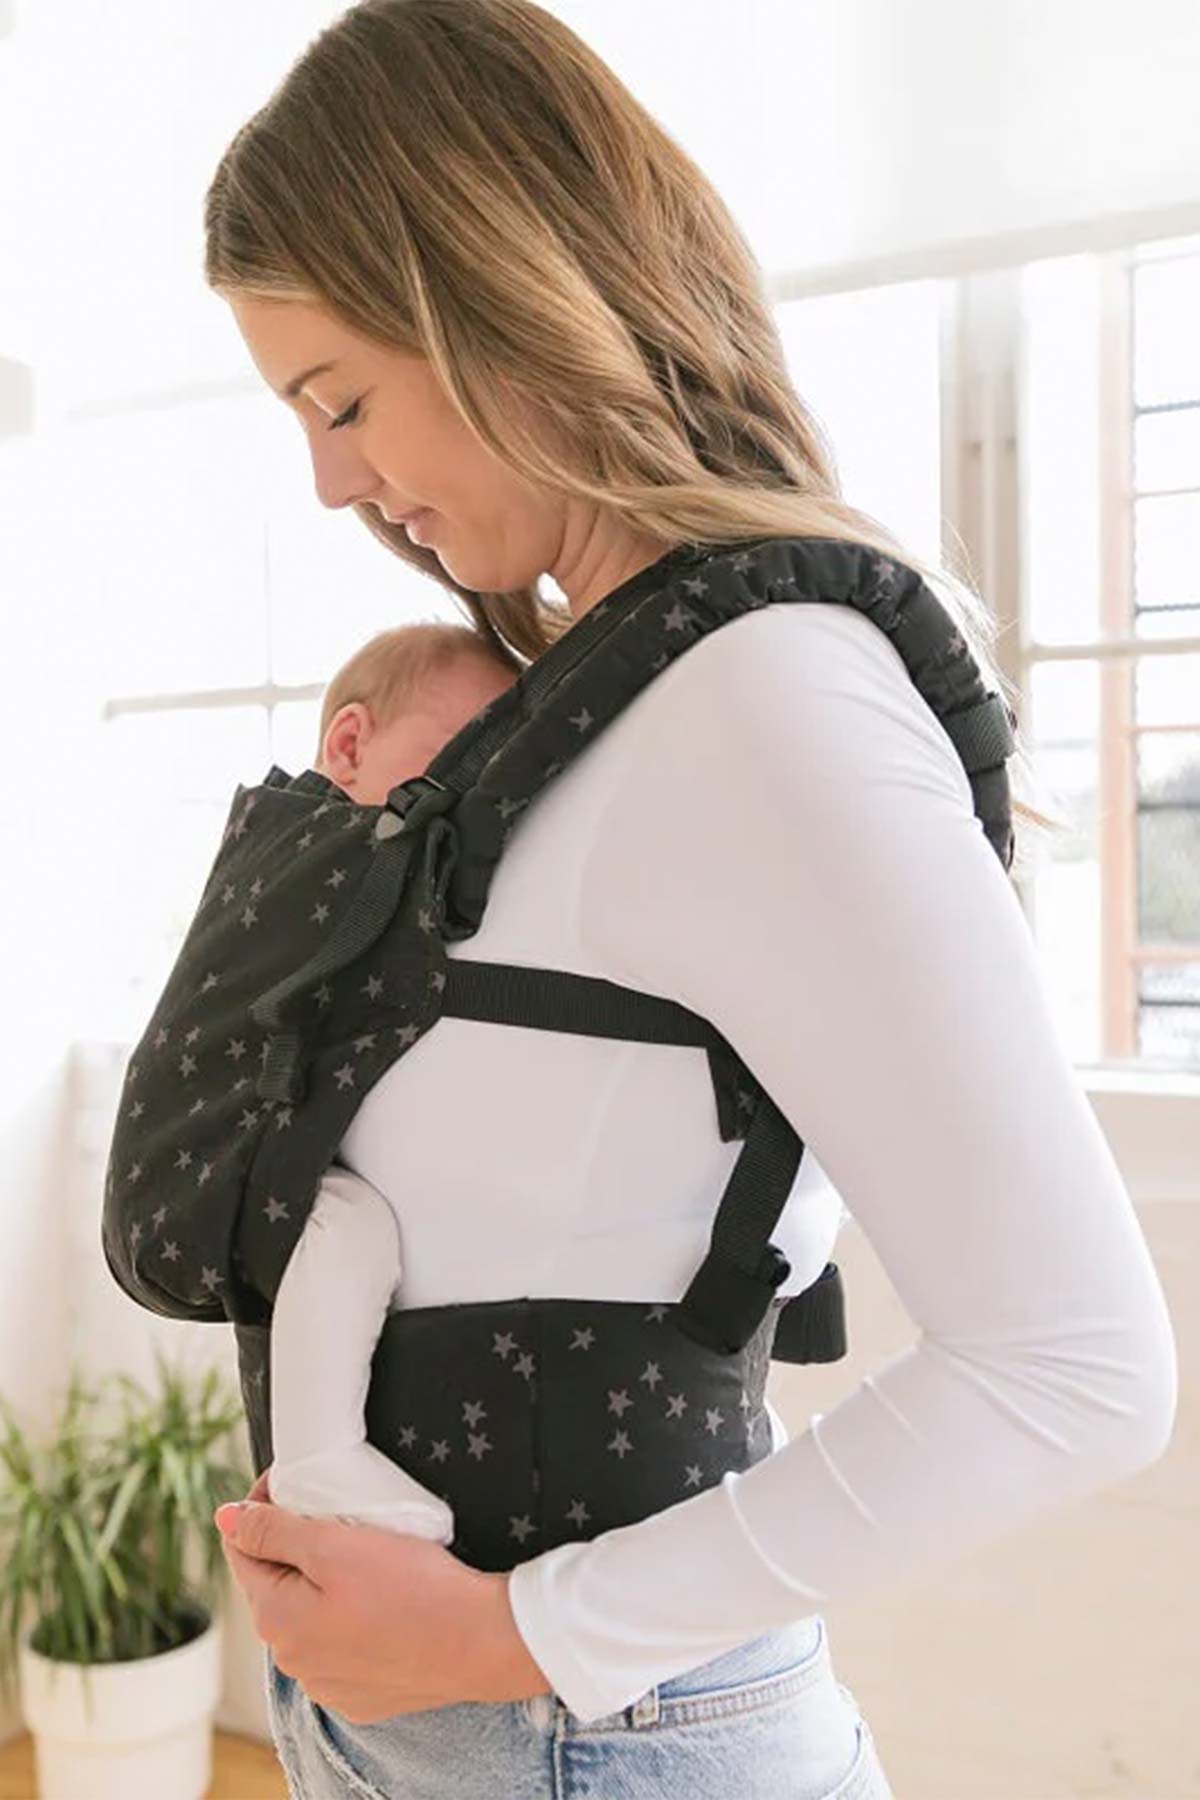 Best Baby Carriers 2023